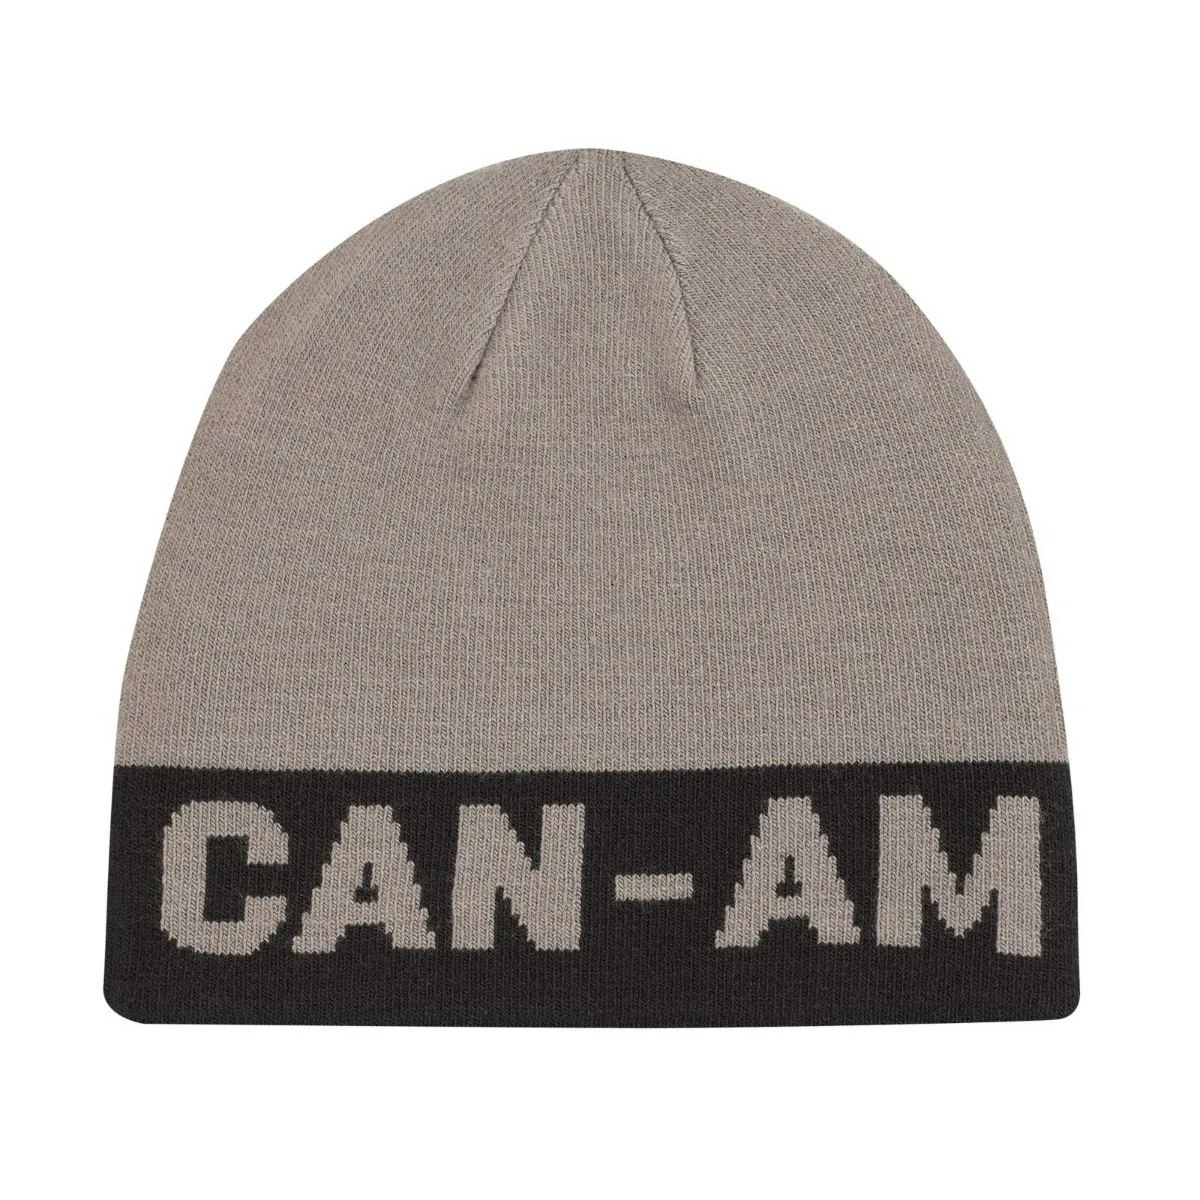 CAN-AM REVERSIBLE BEANIE UNISEX